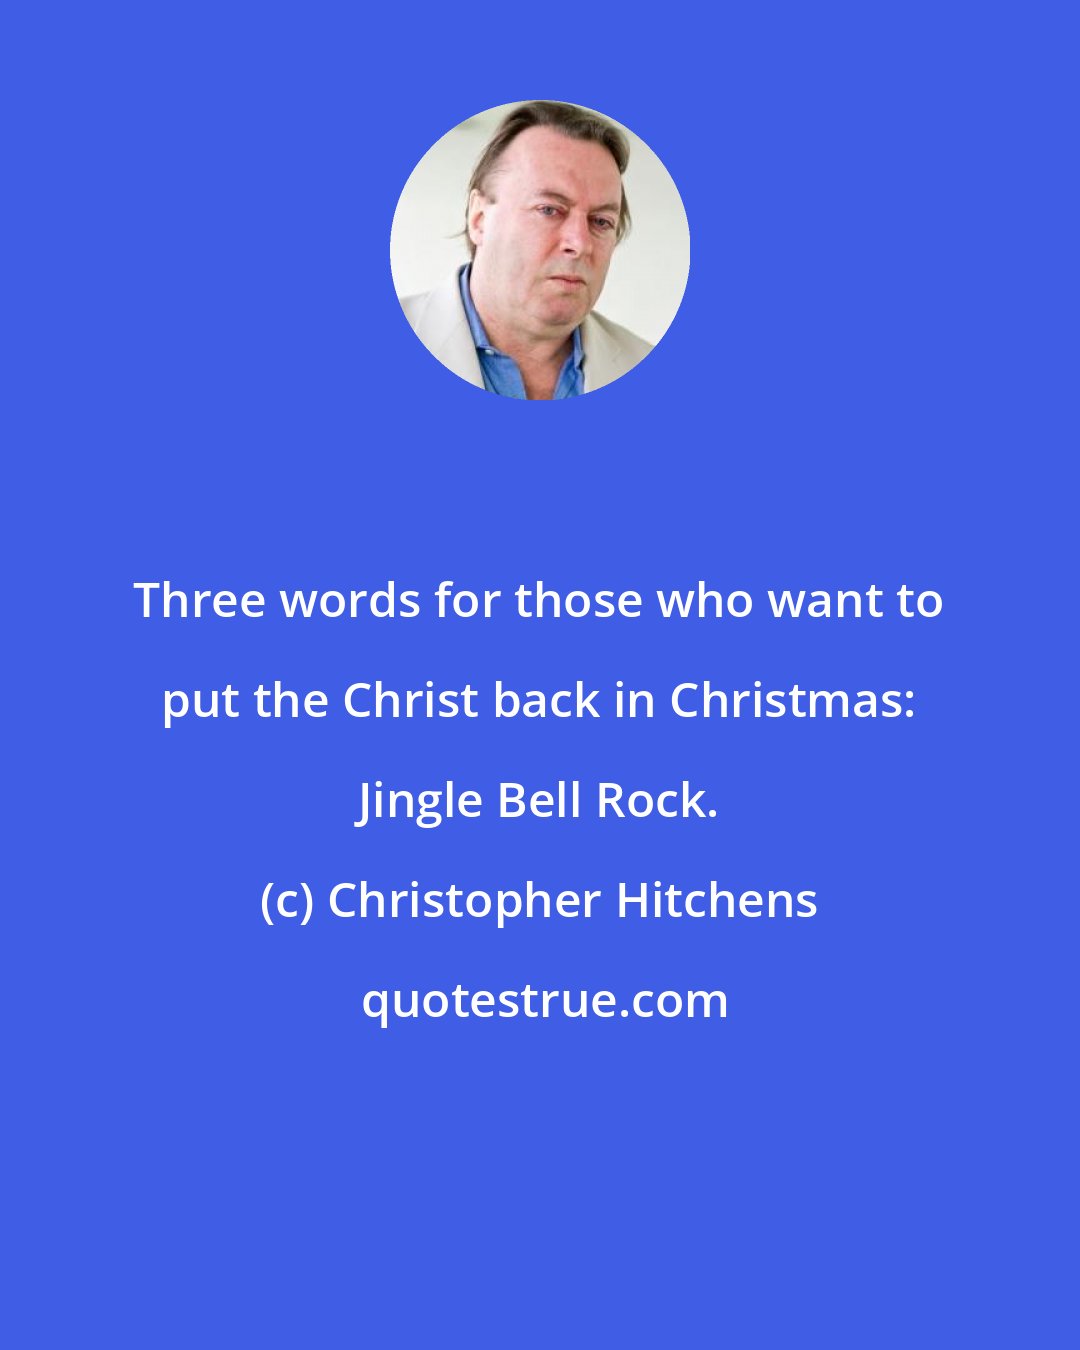 Christopher Hitchens: Three words for those who want to put the Christ back in Christmas: Jingle Bell Rock.